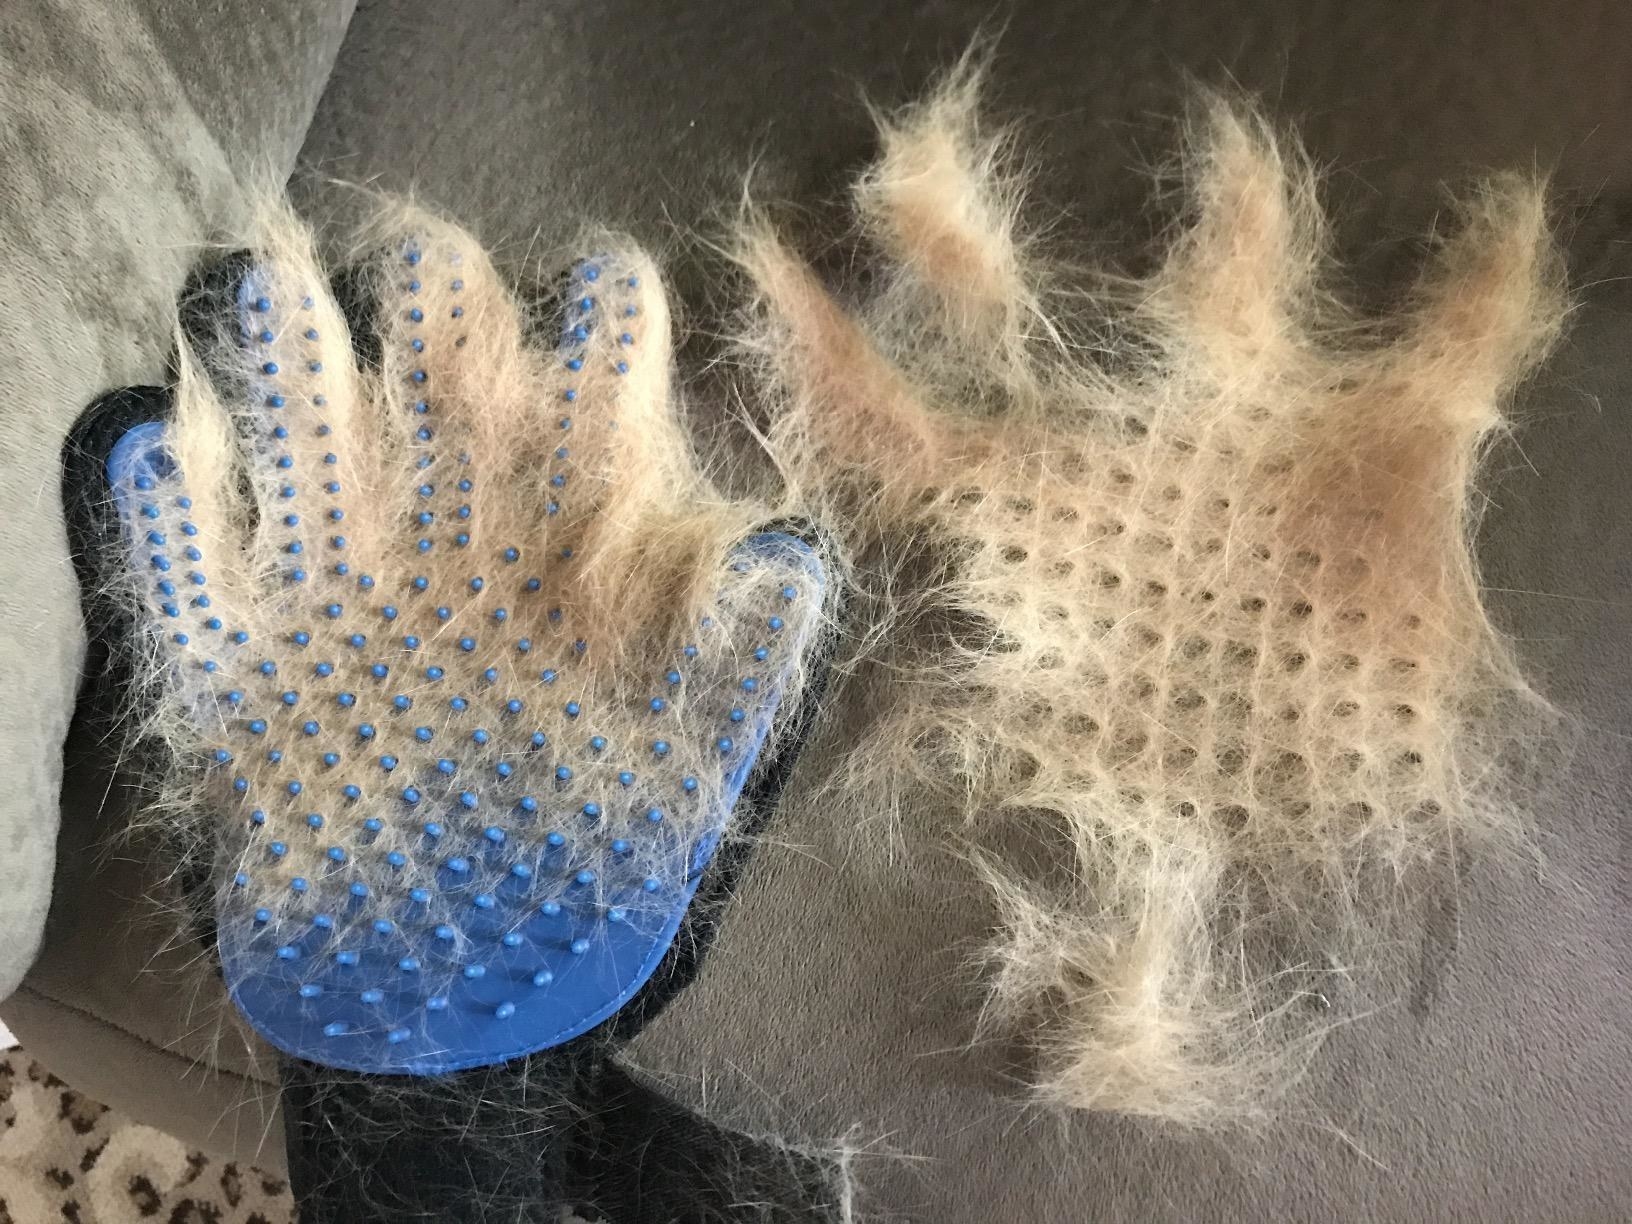 Reviewer photo showing how the glove picked up a large amount of cat hair, next to cat hair that was peeled off the glove